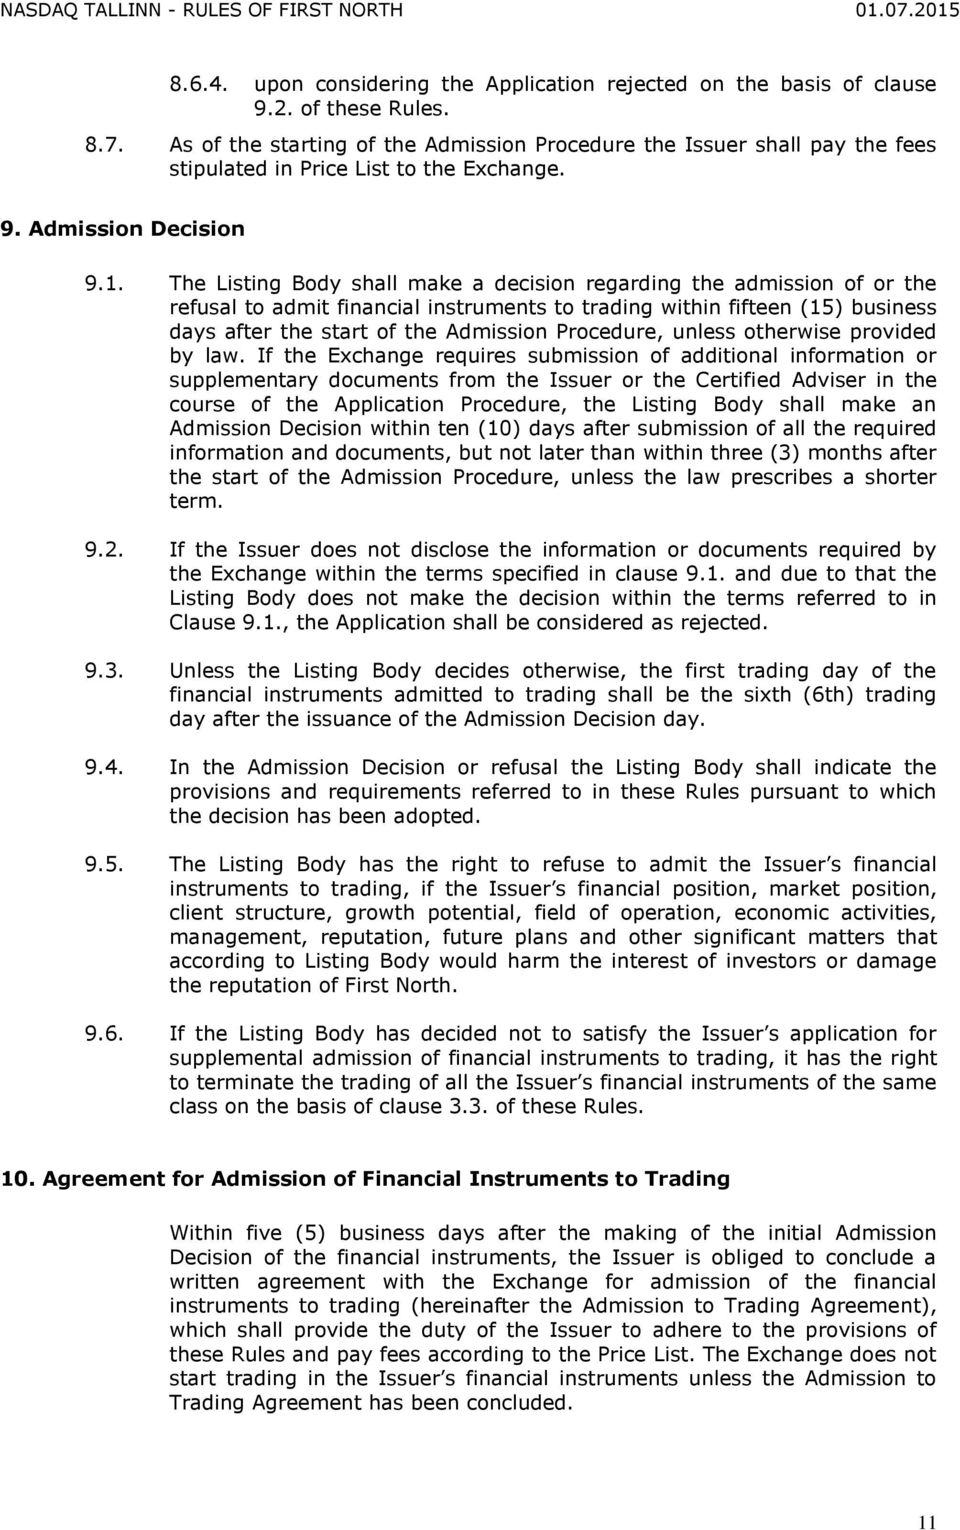 The Listing Body shall make a decision regarding the admission of or the refusal to admit financial instruments to trading within fifteen (15) business days after the start of the Admission